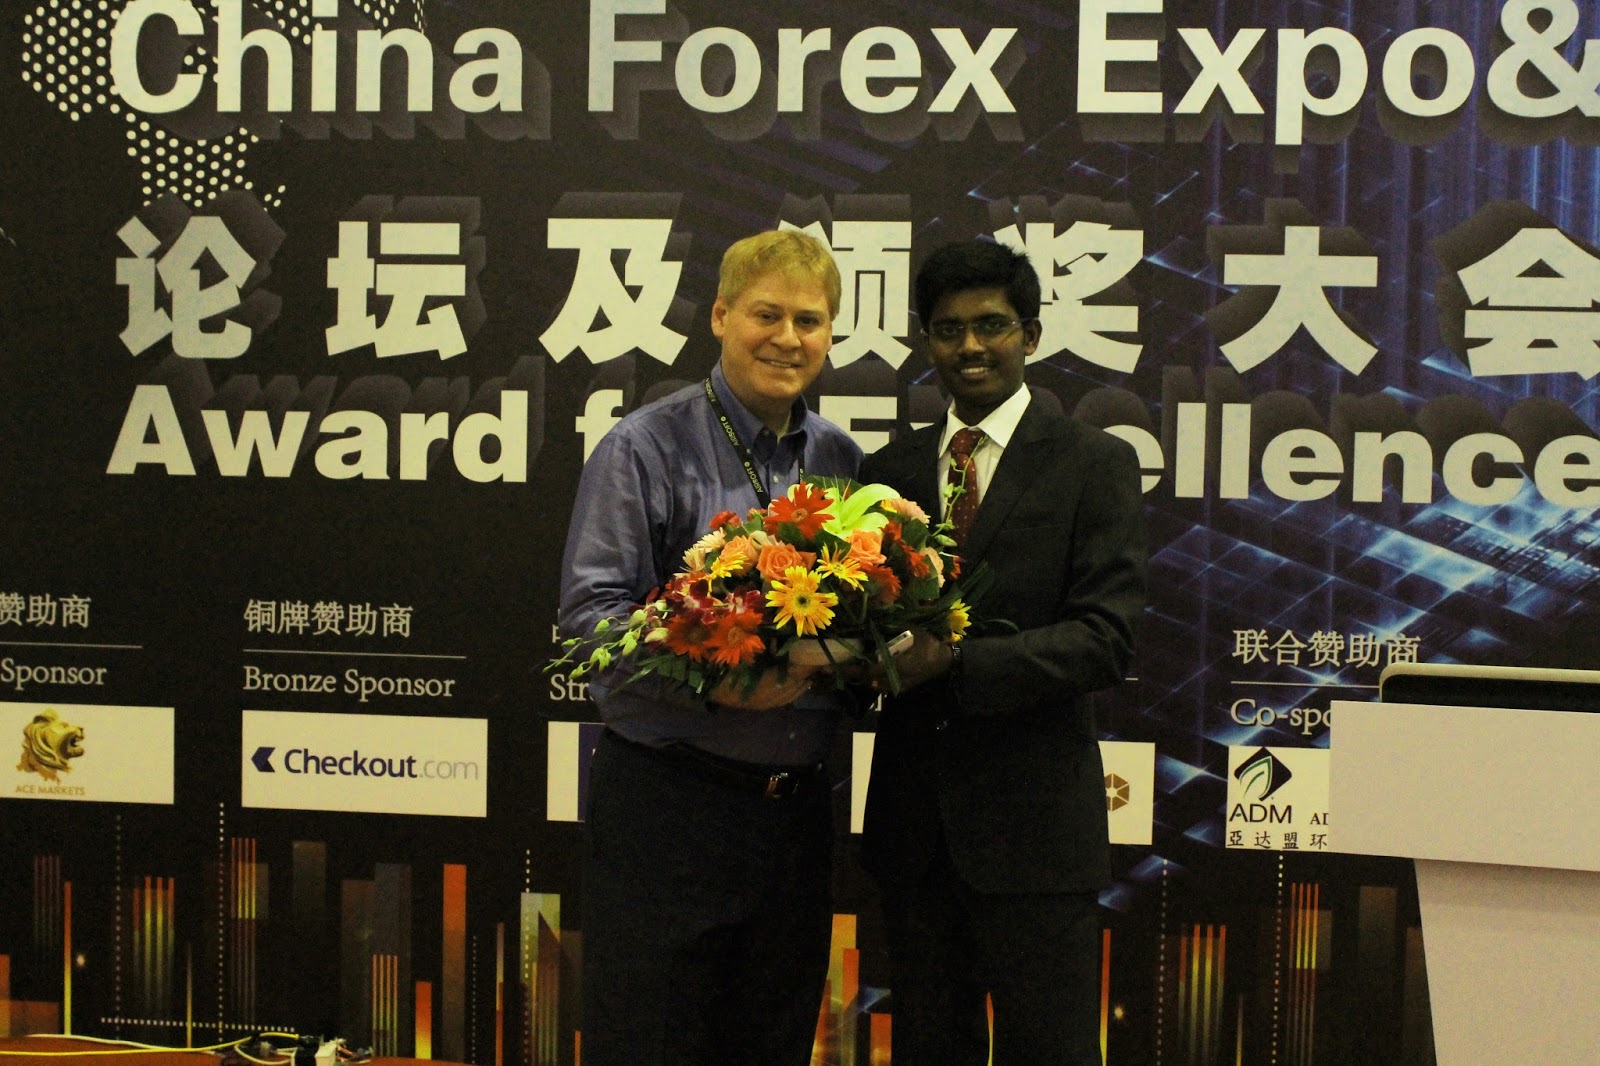 Chian forex expo 2020